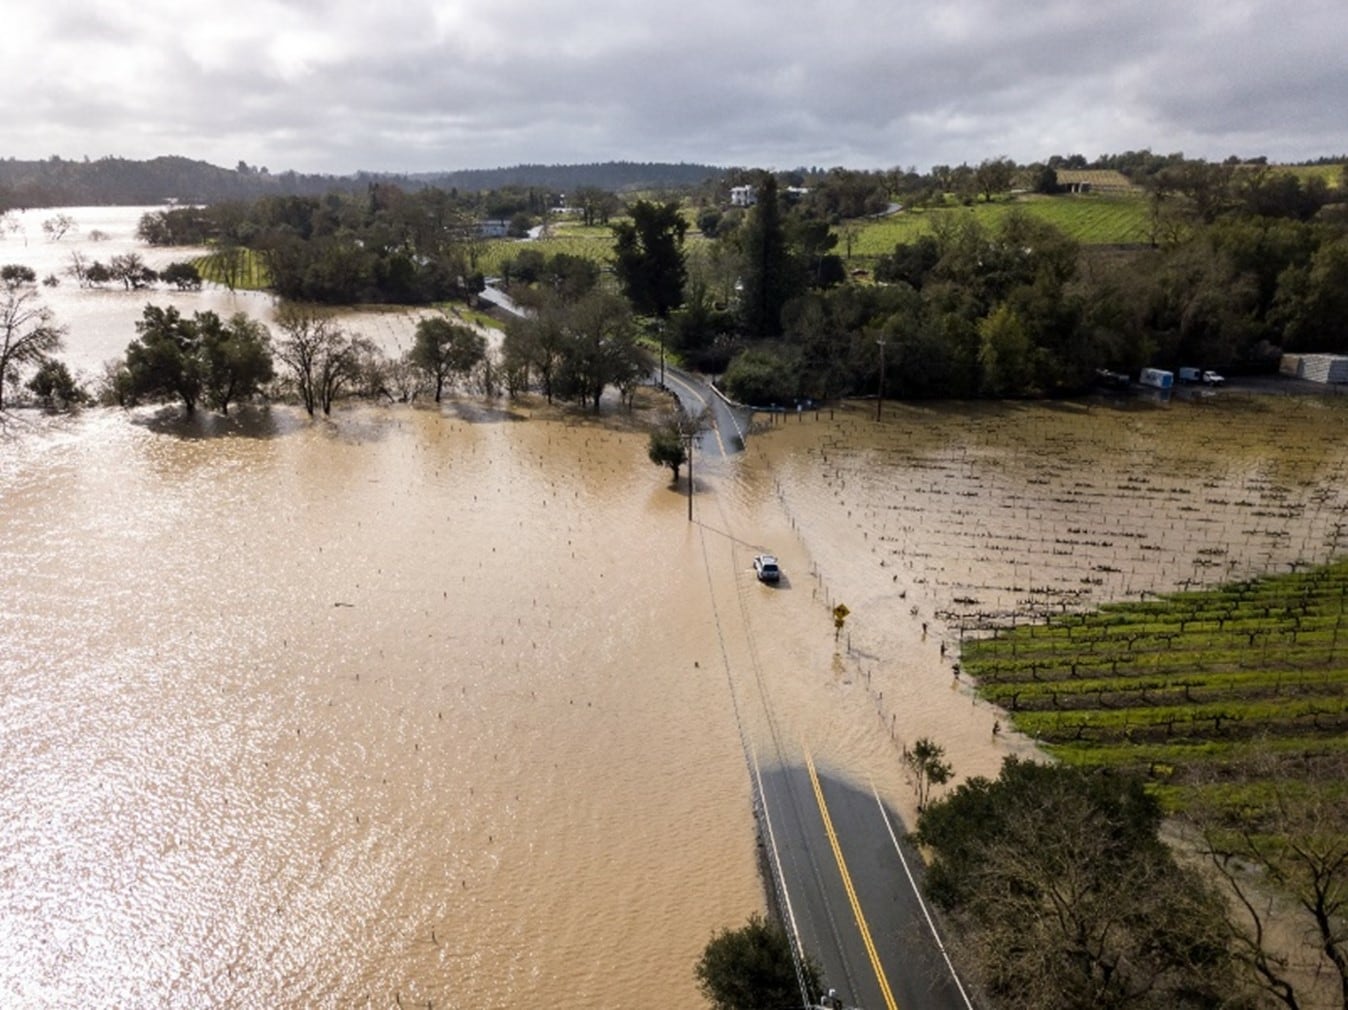 The Russian River floods in Northern California